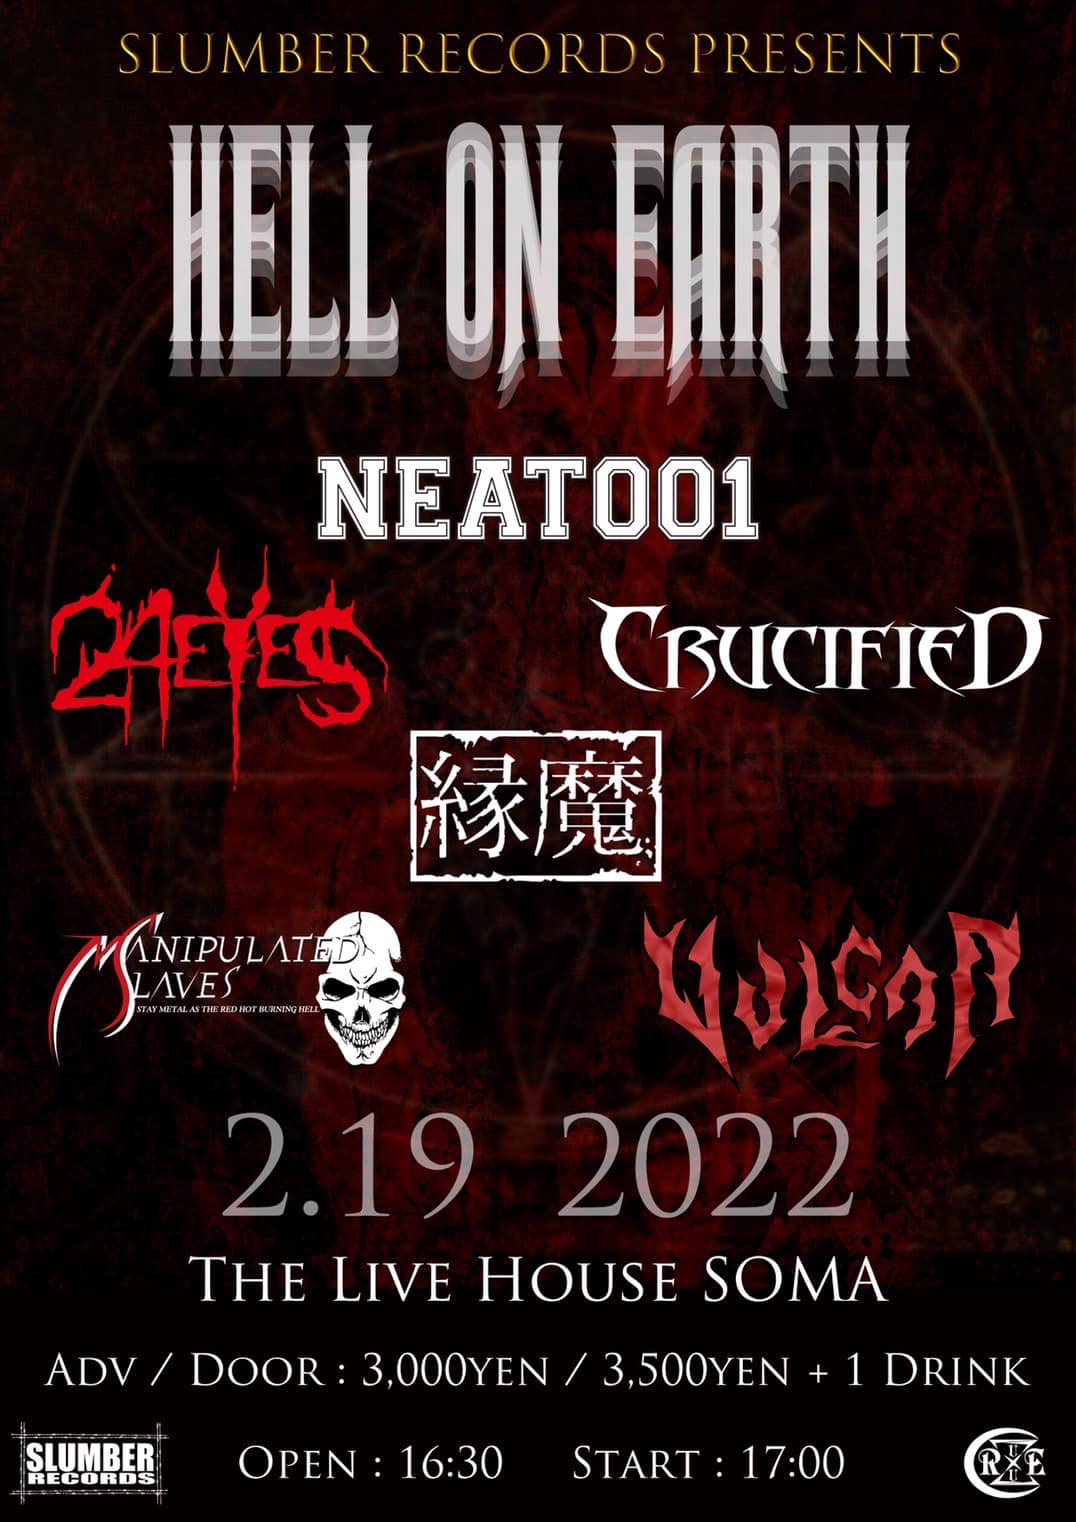 20220219 “SLUMBER RECORDS presents HELL ON EARTH”